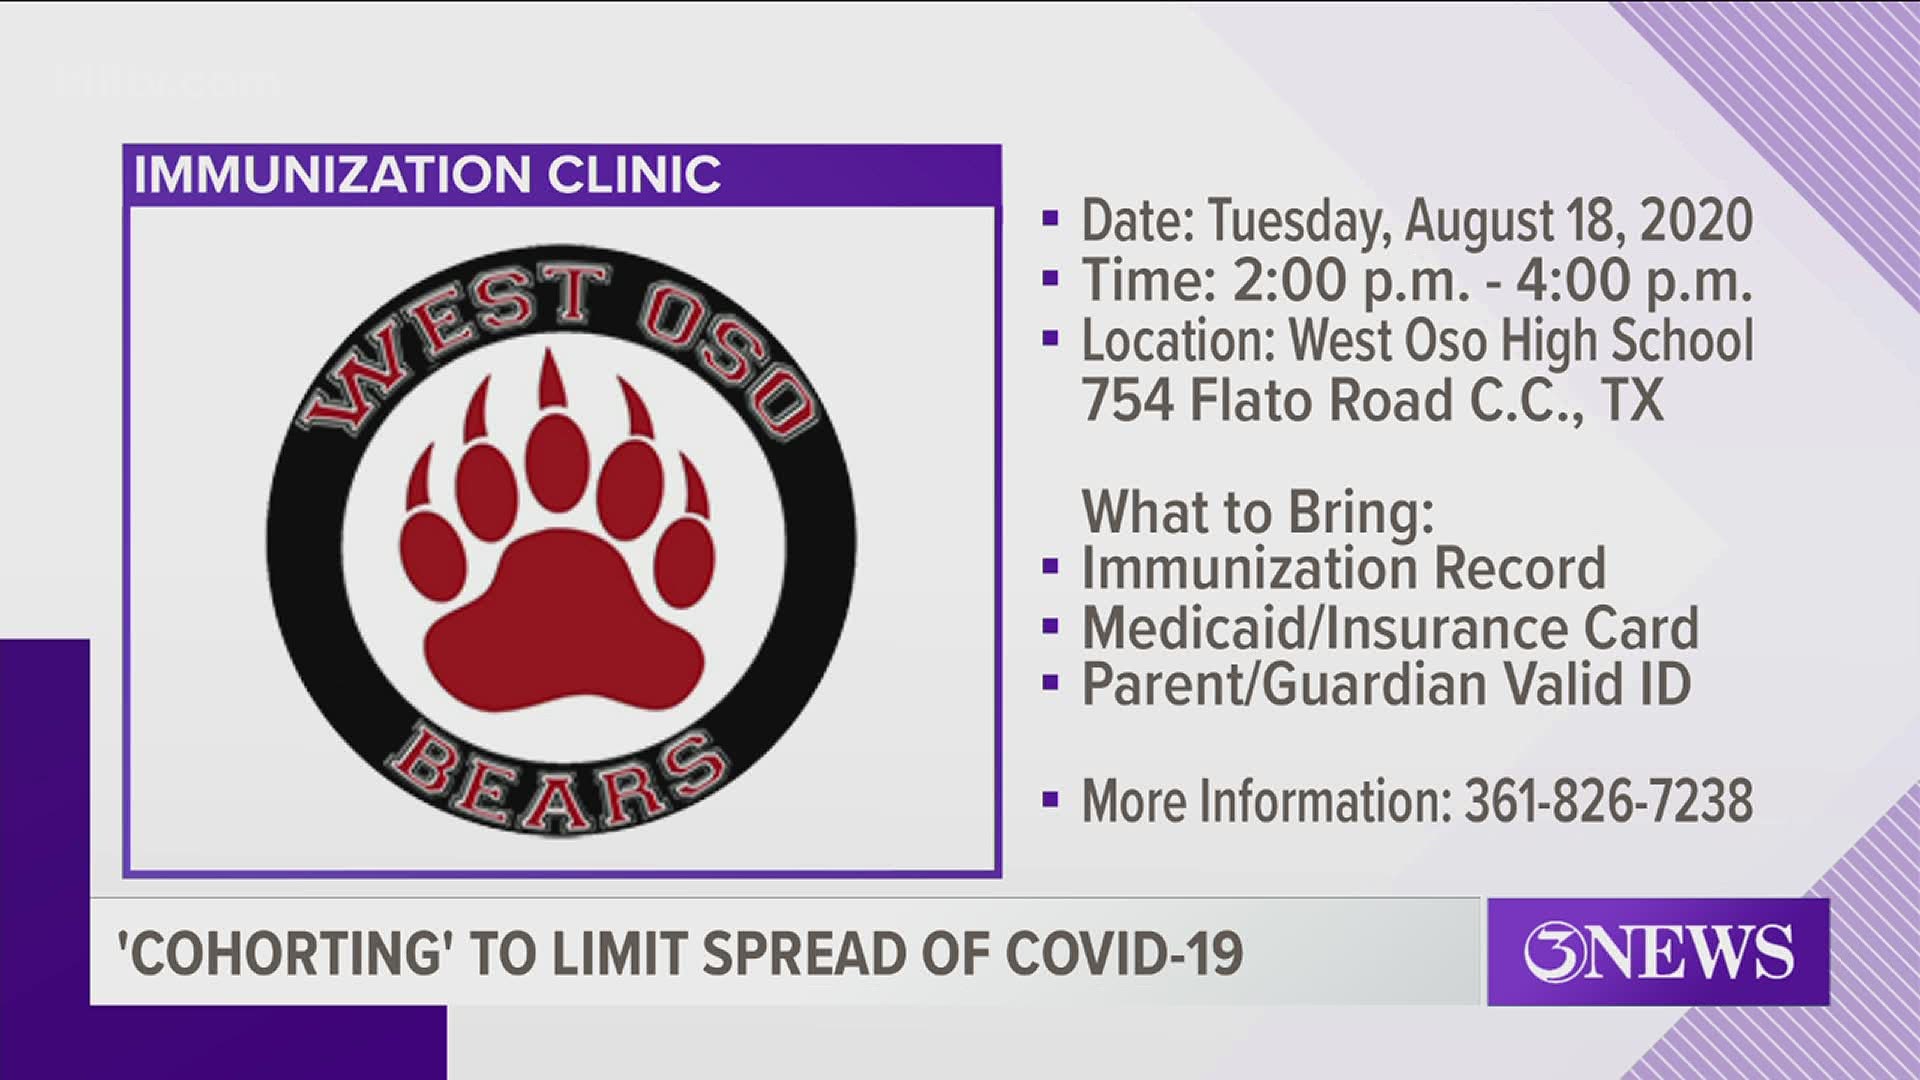 The drive-thru immunizations will be held at West Oso High School, located at 754 Flato Road, on Aug. 18 from 2 p.m. to 4 p.m.